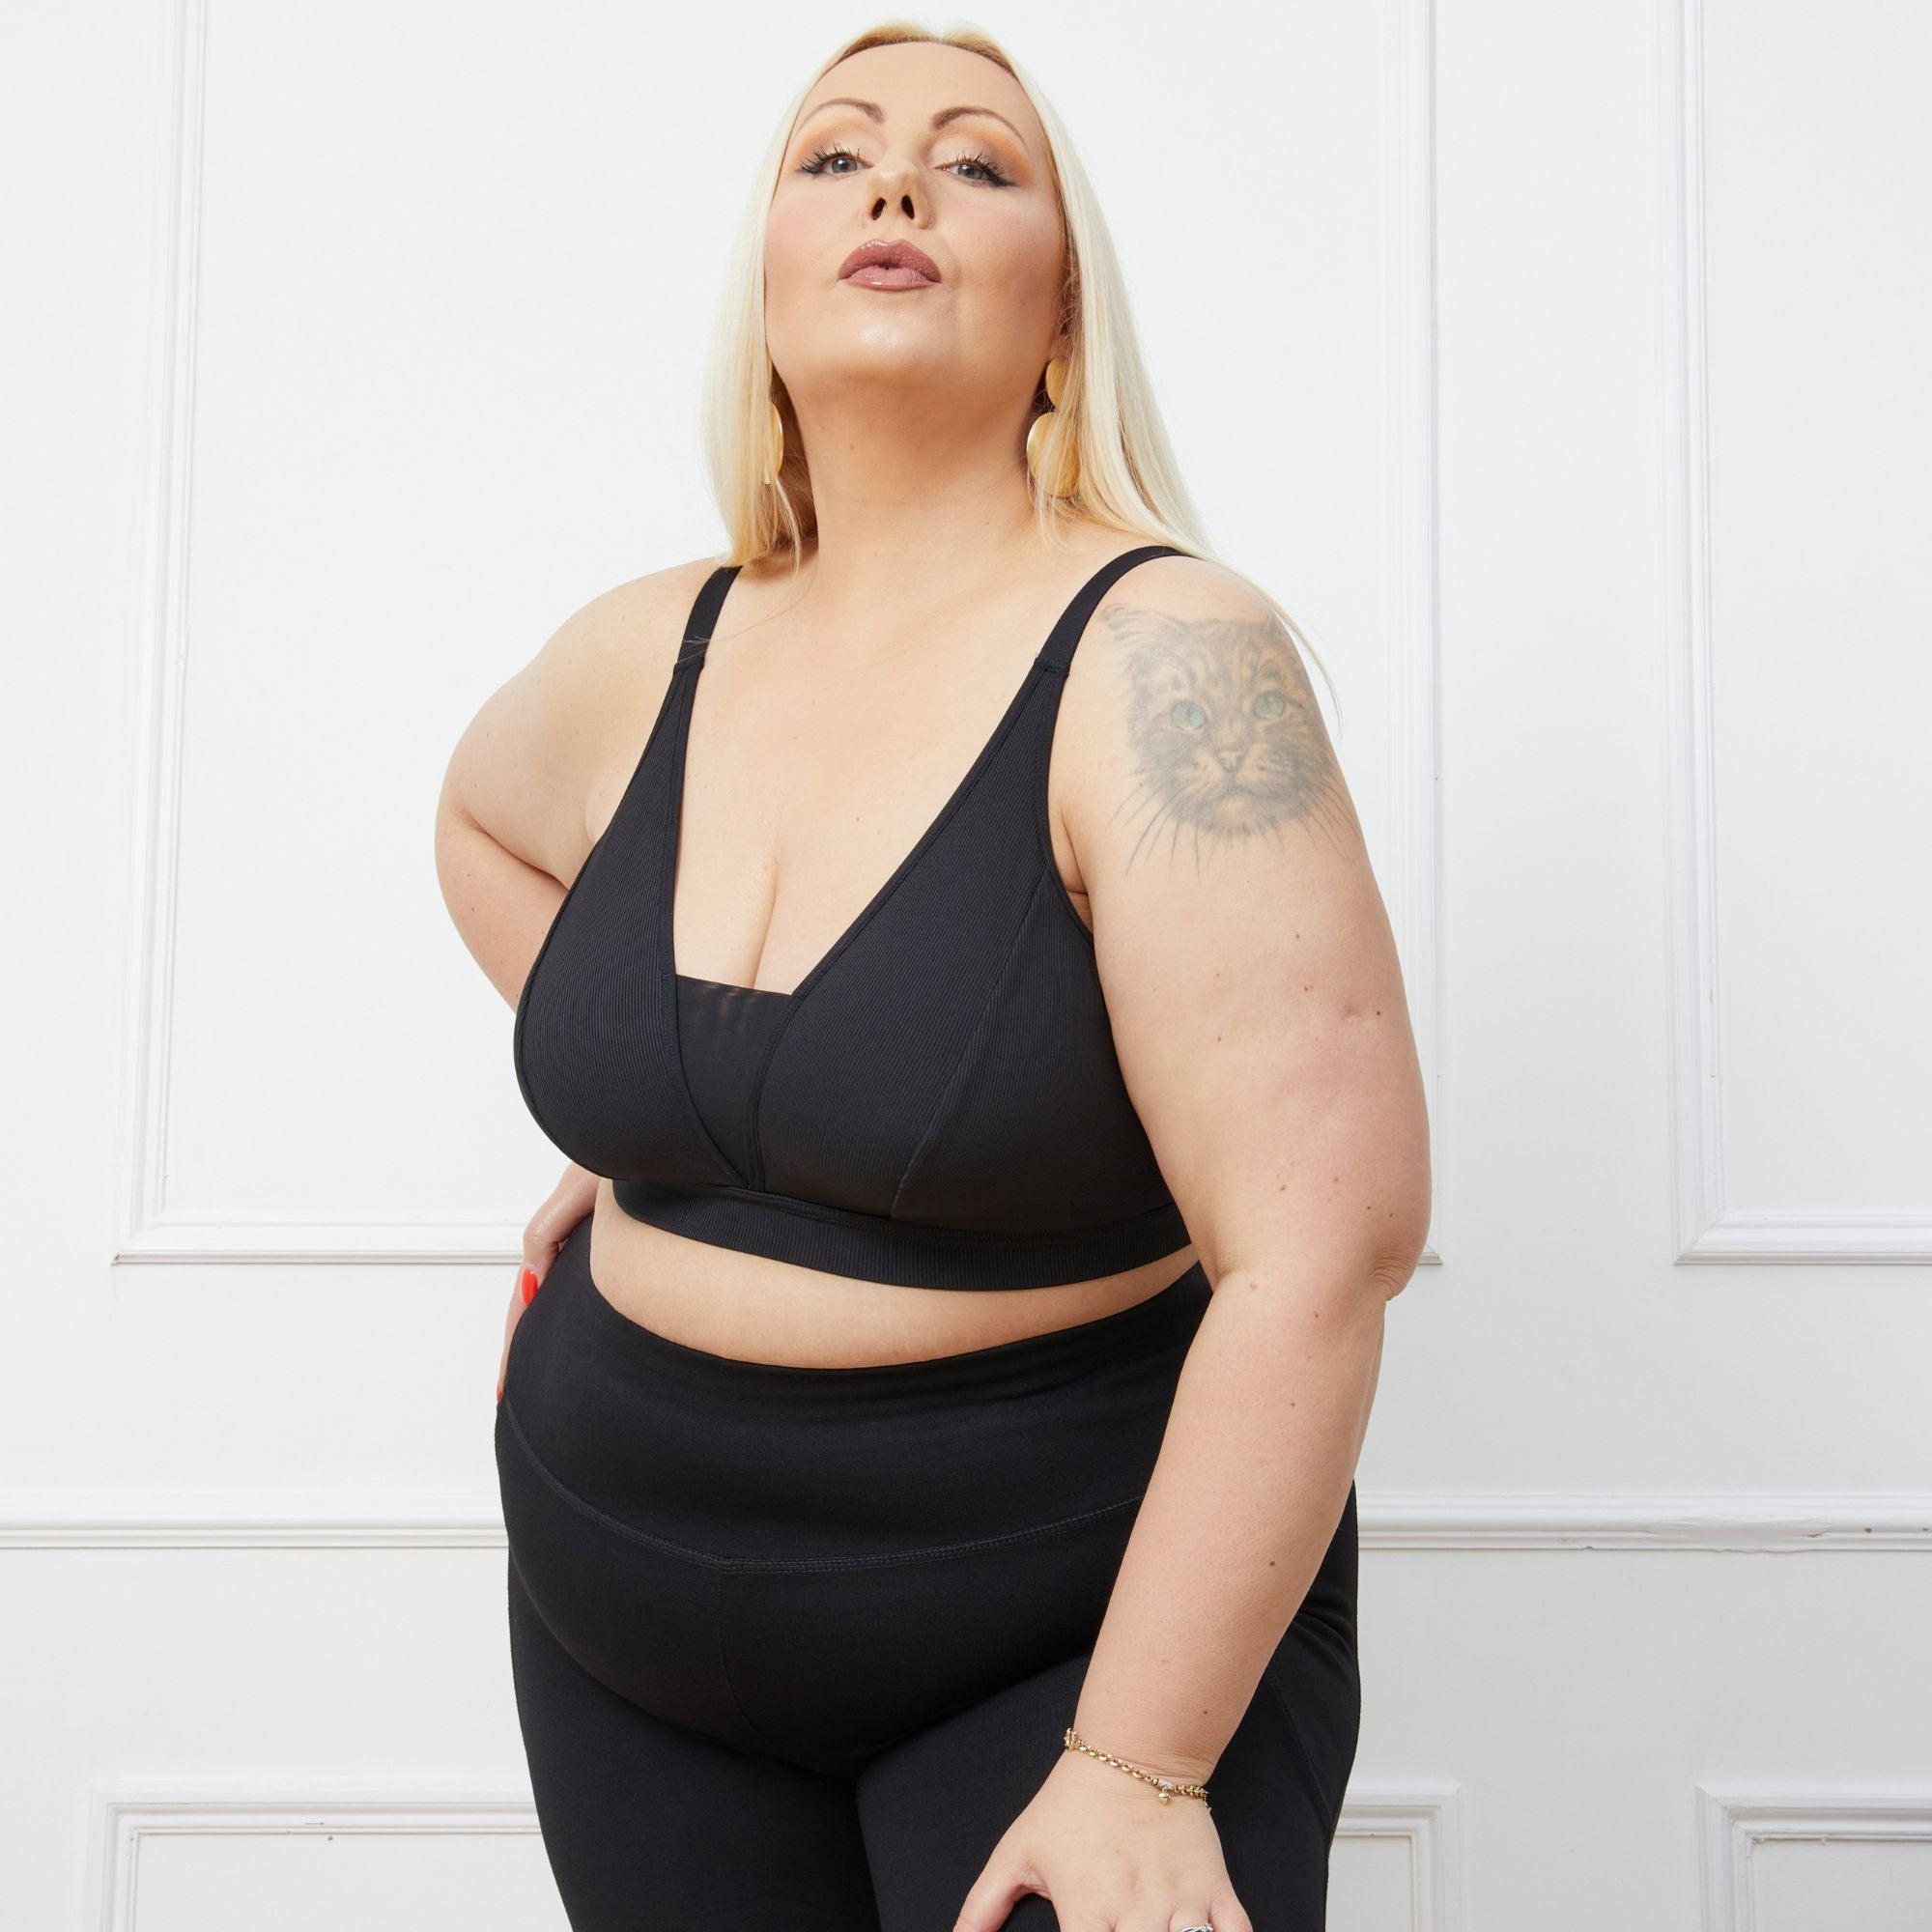 Molke - Our Black Flexi-Size bras are getting a restock